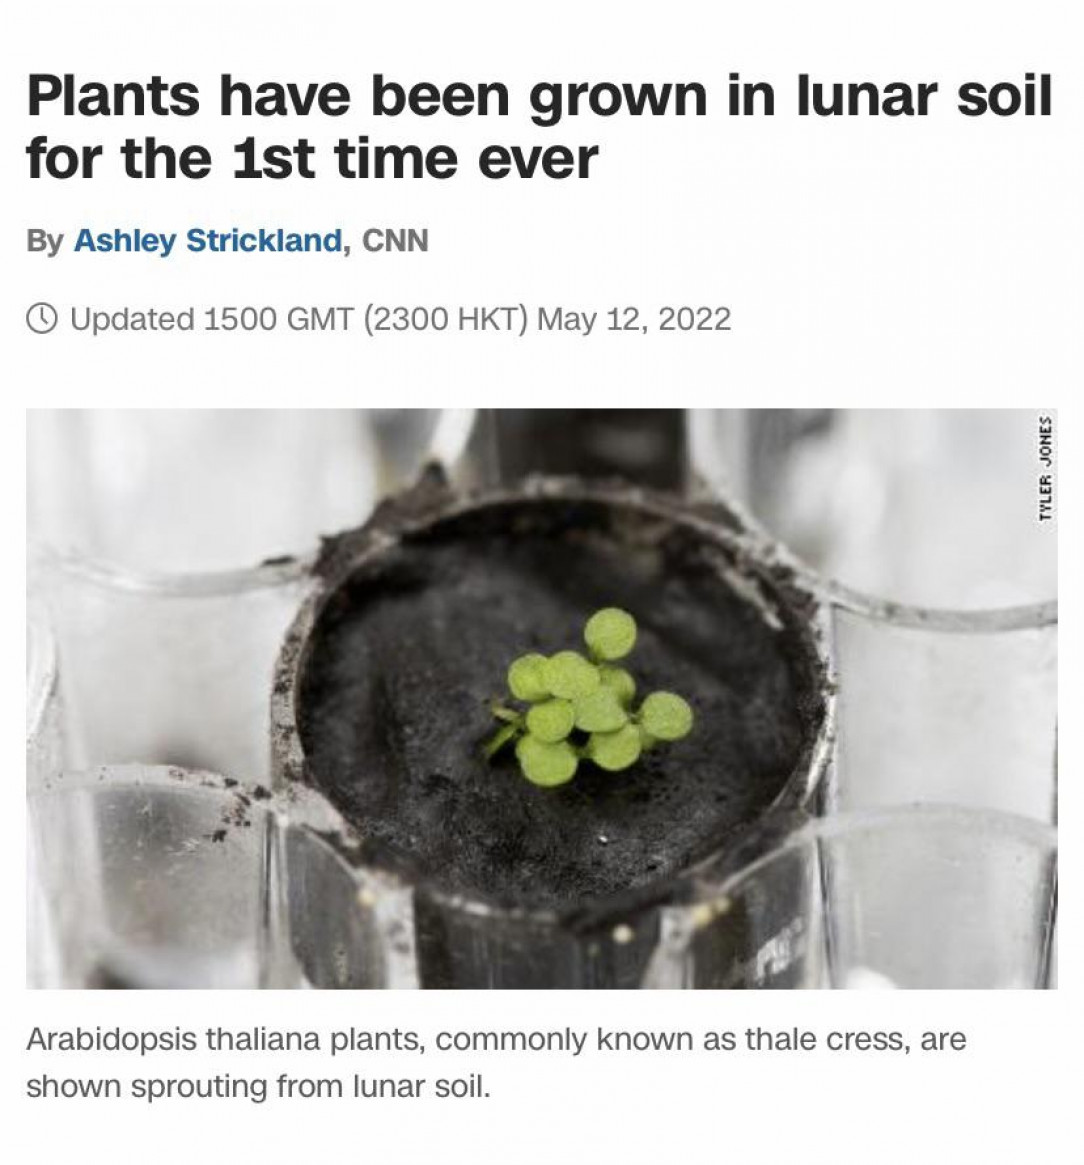 The first plants in lunar soil